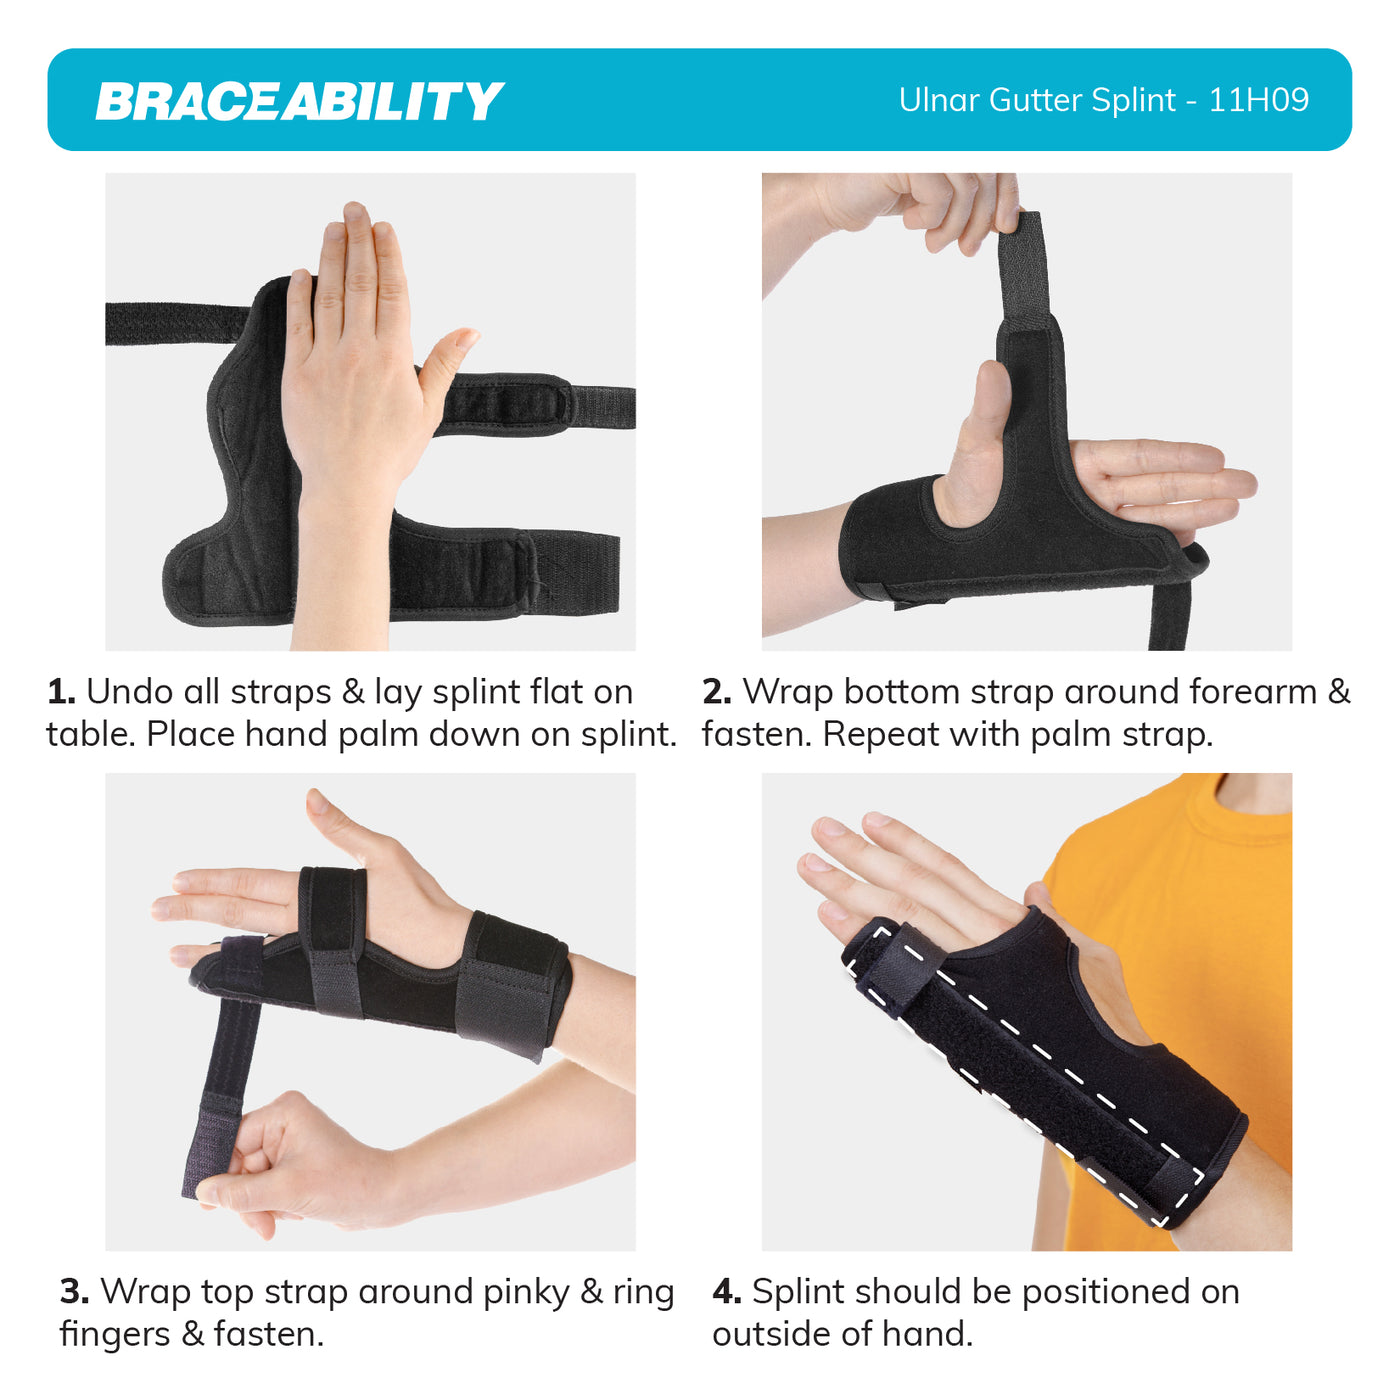 the instruction sheet for the ulnar gutter splint has three simple wrap around straps